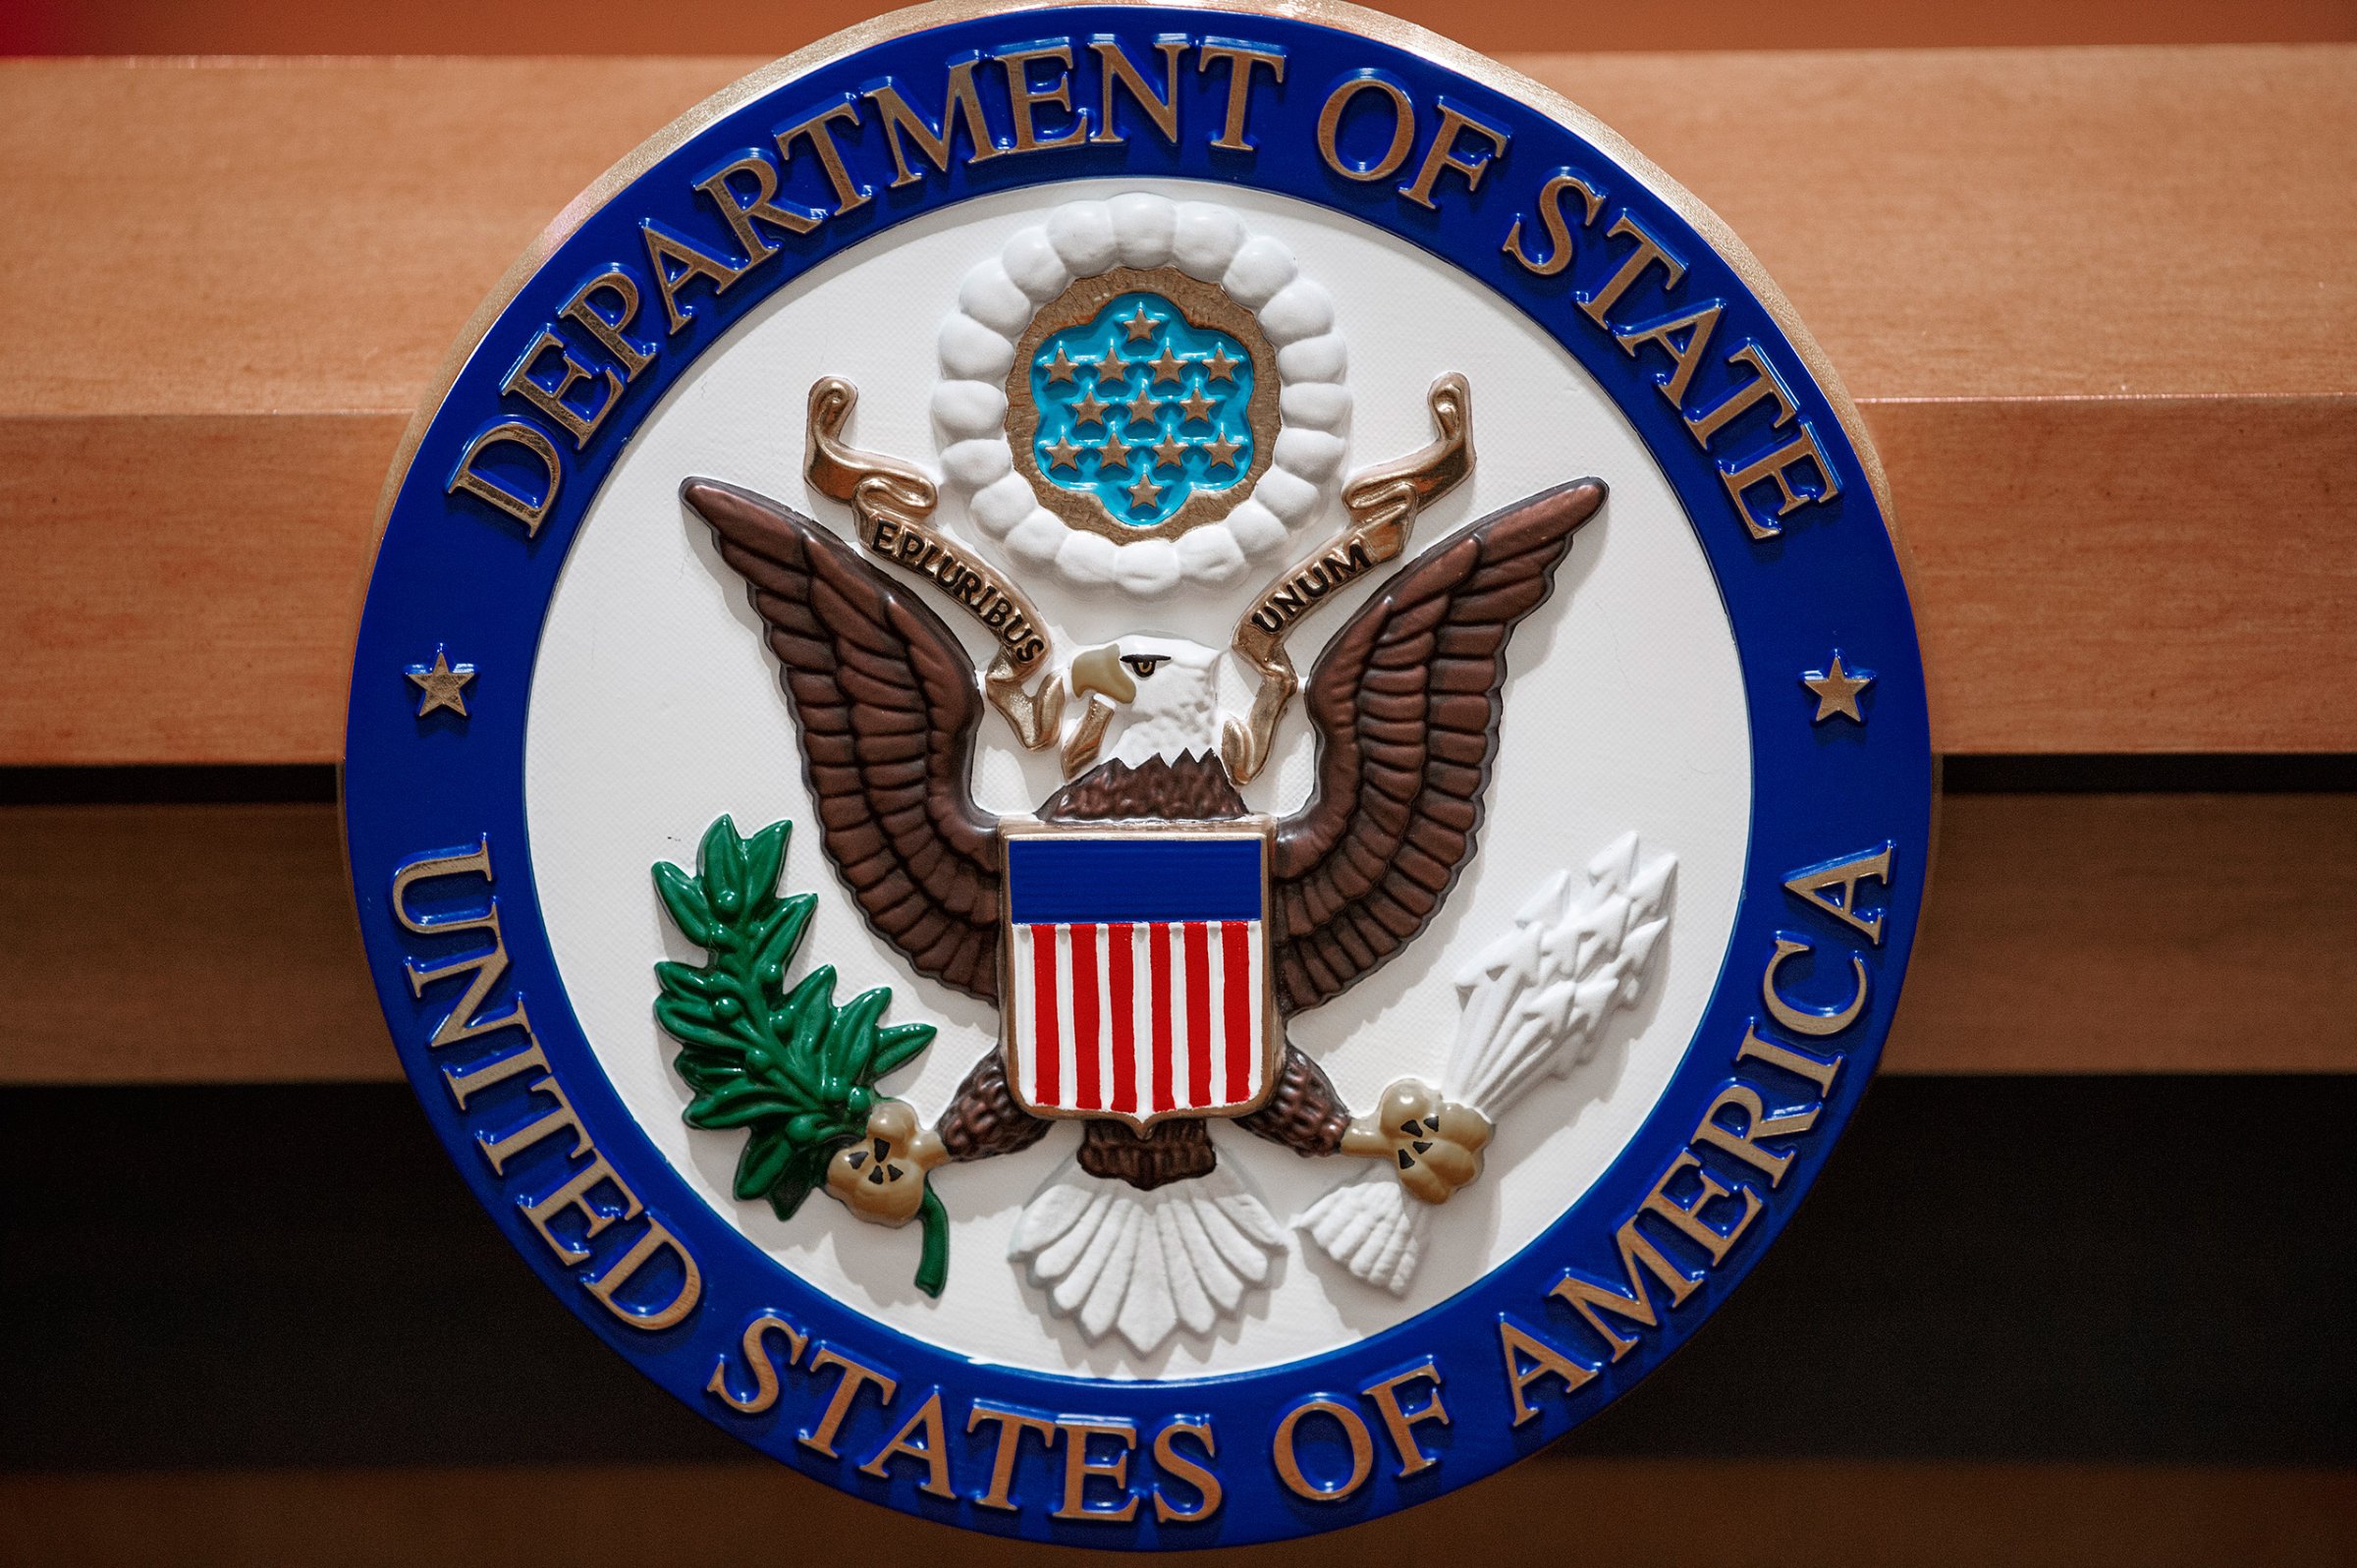 The seal of the U.S. Department of State is seen on the lectern in a briefing room in Washington, D.C., Nov. 26, 2013.